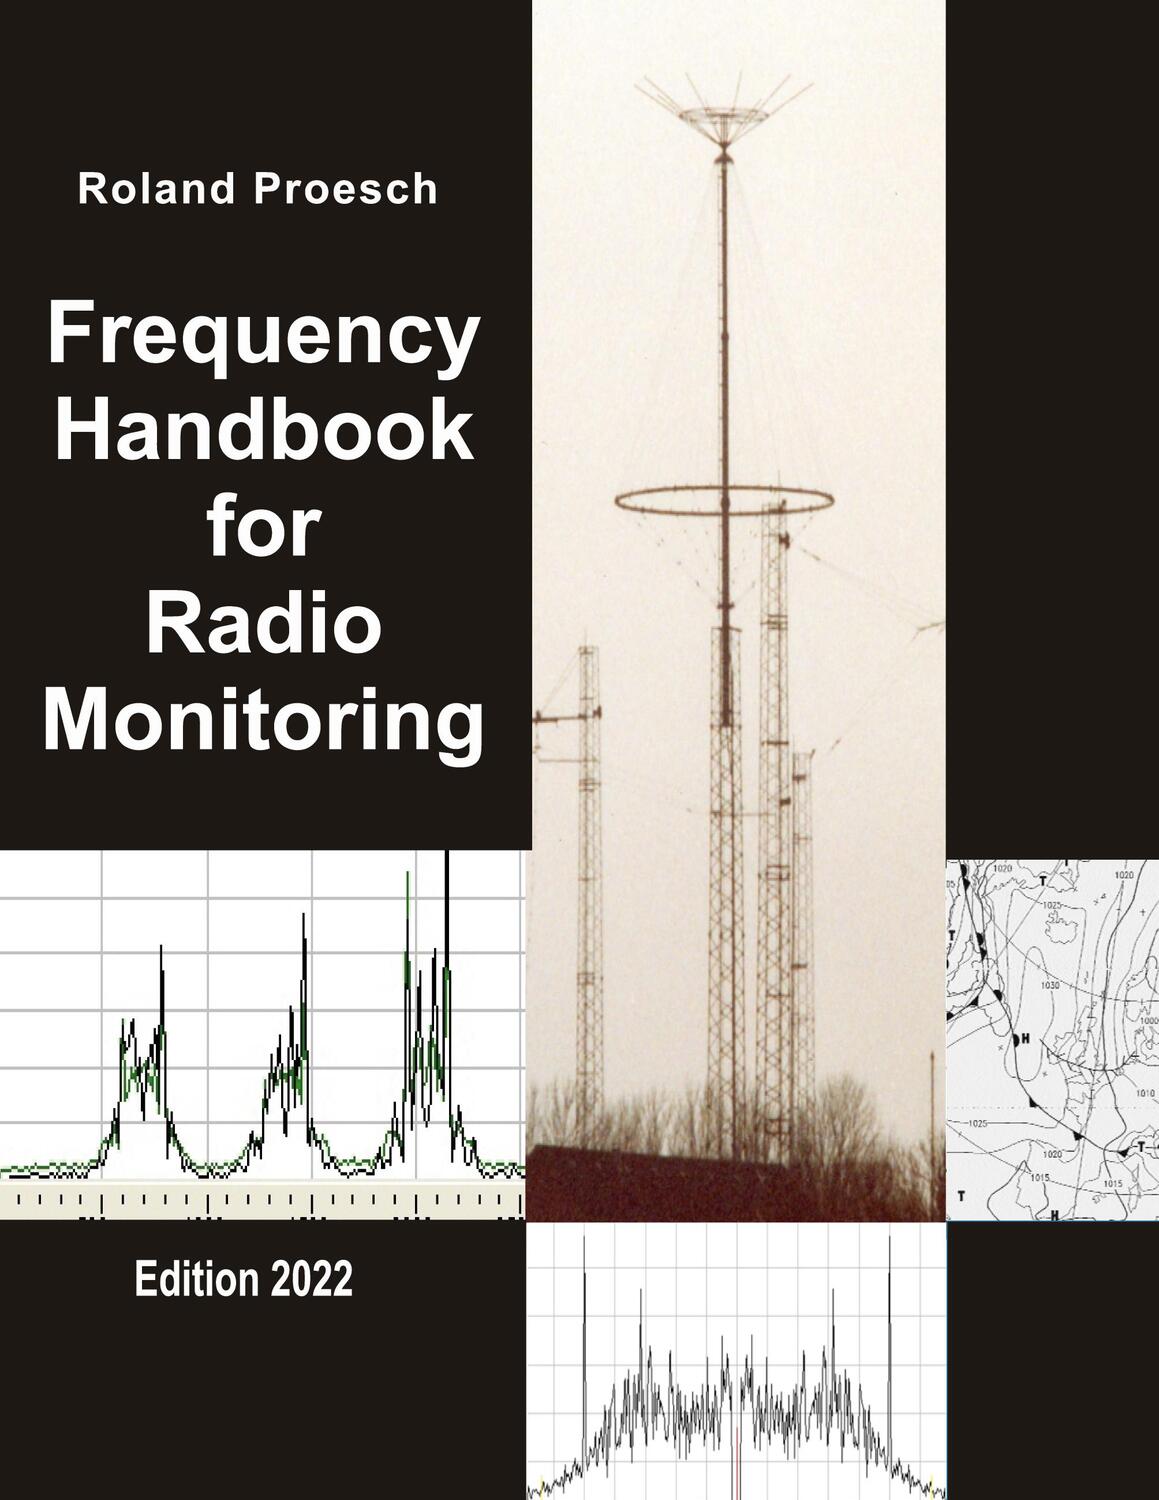 Cover: 9783751952194 | Frequency Handbook for Radio Monitoring HF | Edition 2022 | Proesch